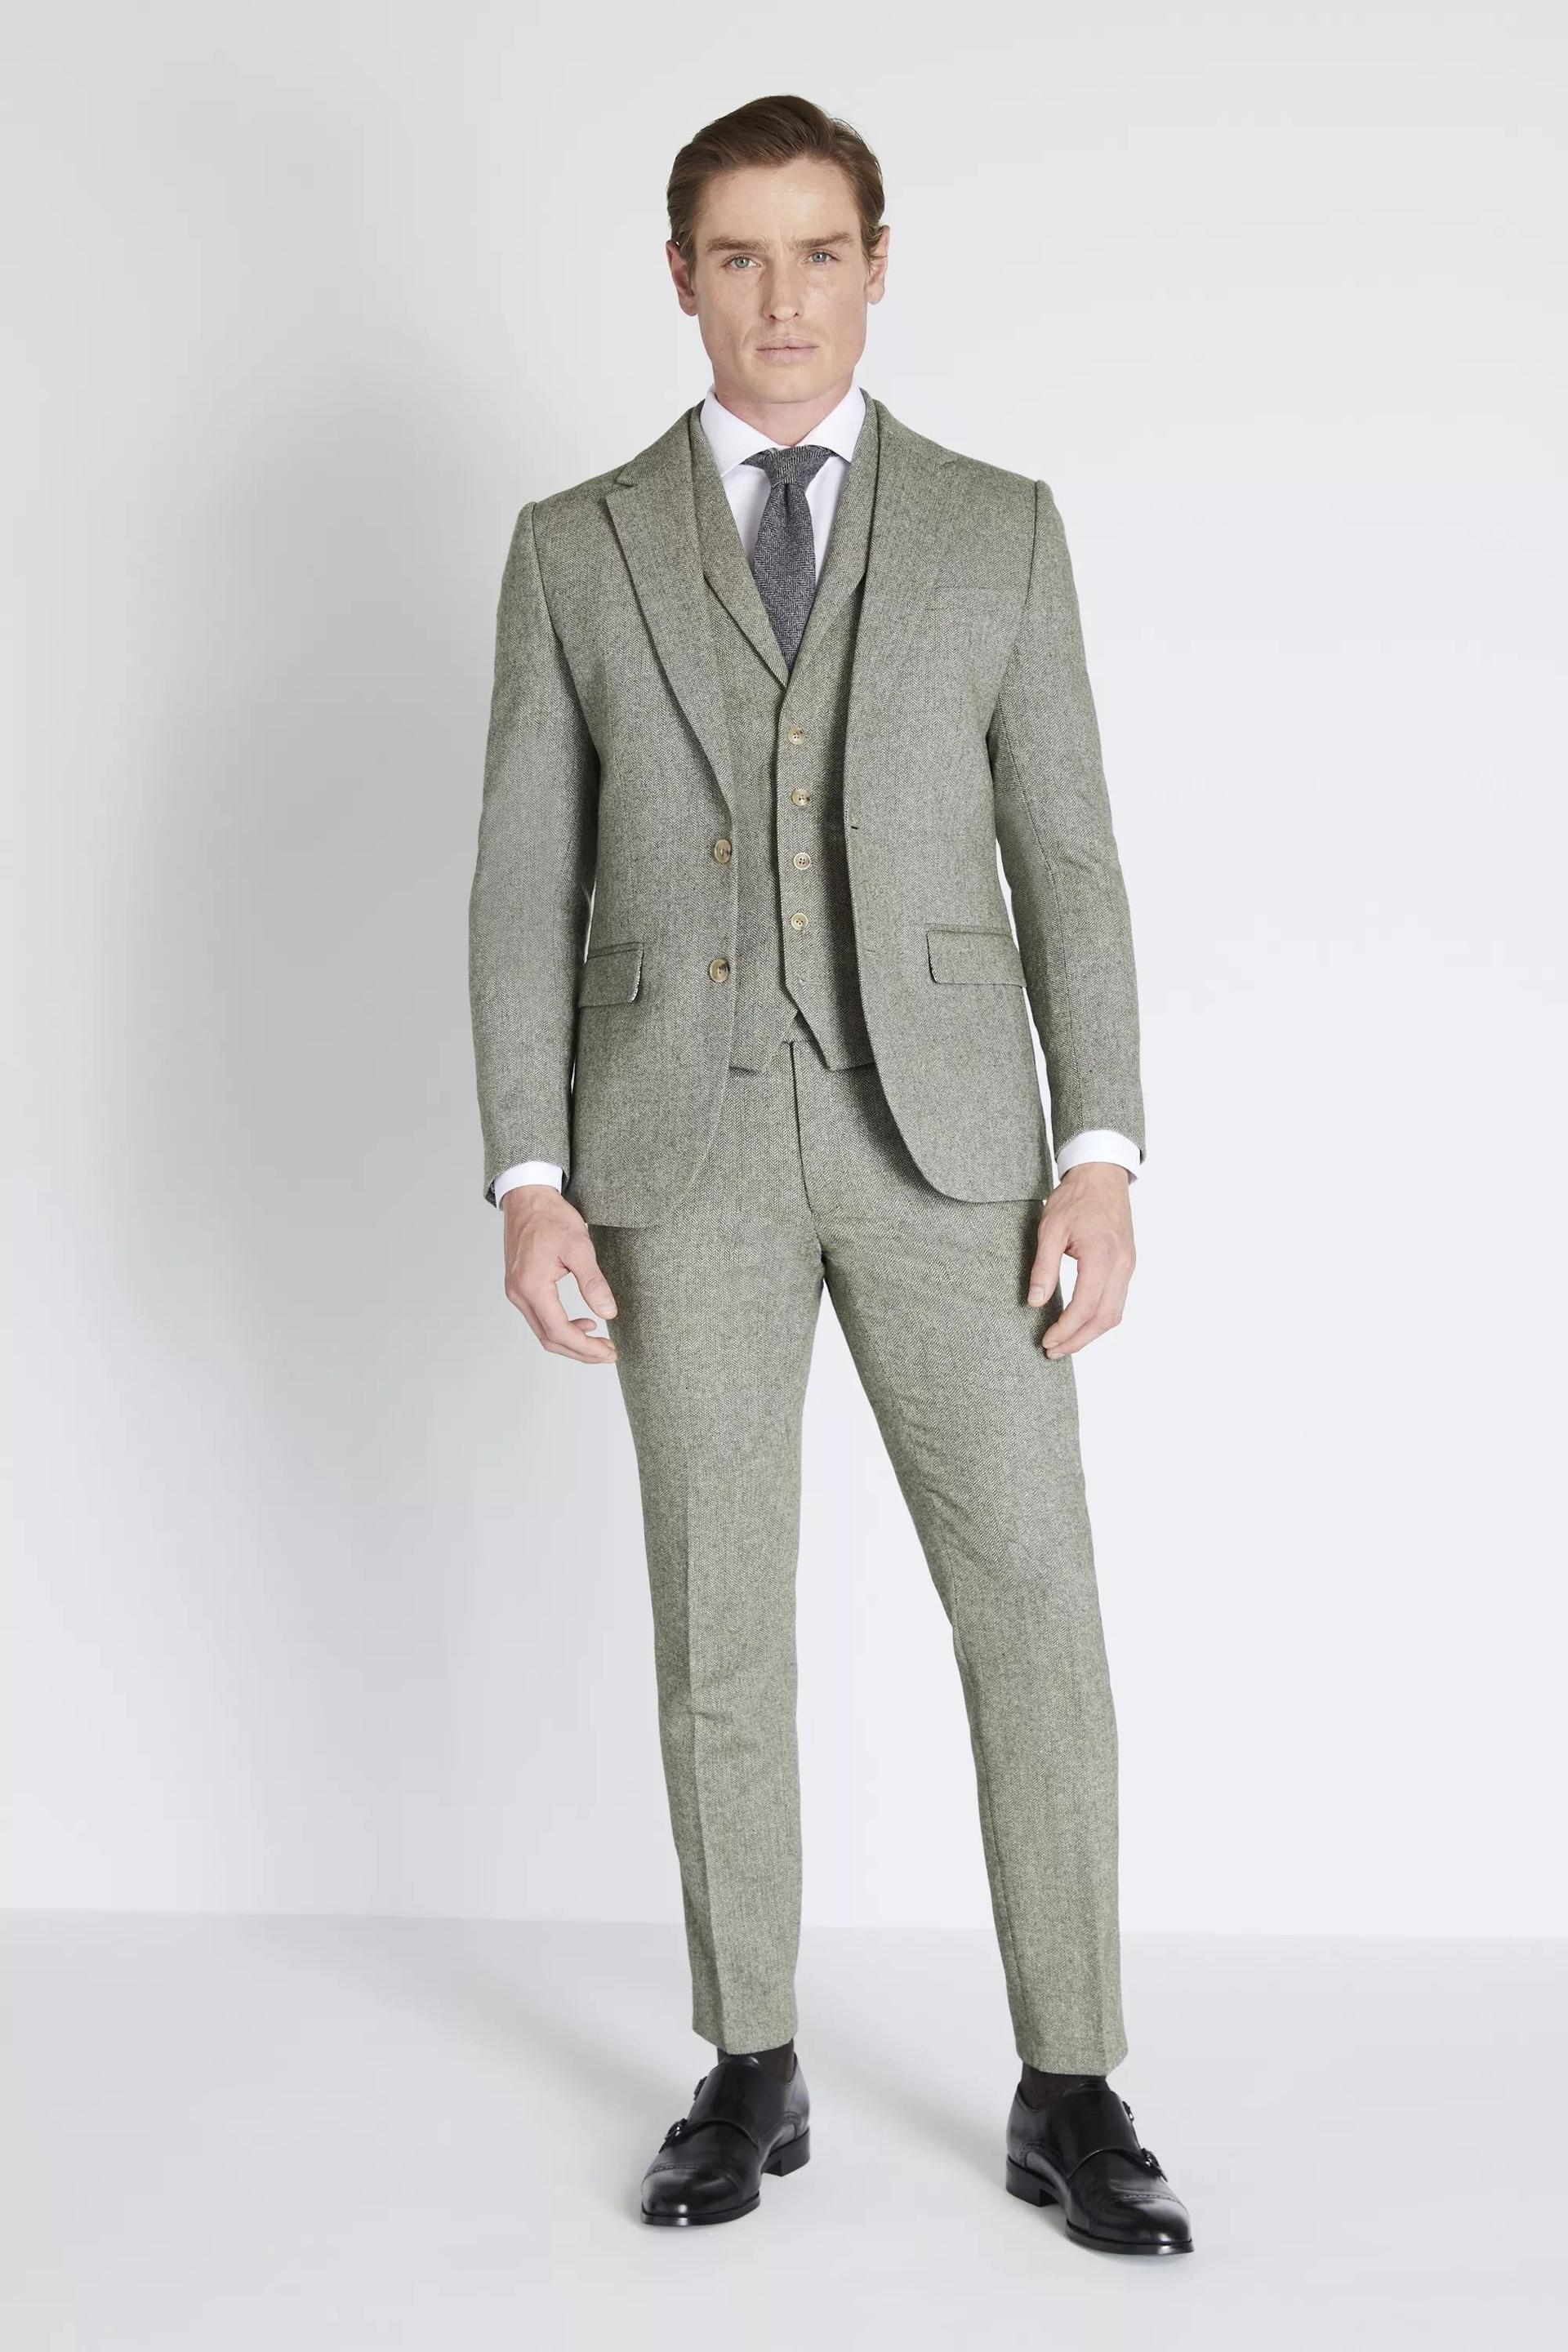 12 Tweed Wedding Suits for a Rustic Feel - hitched.co.uk - hitched.co.uk